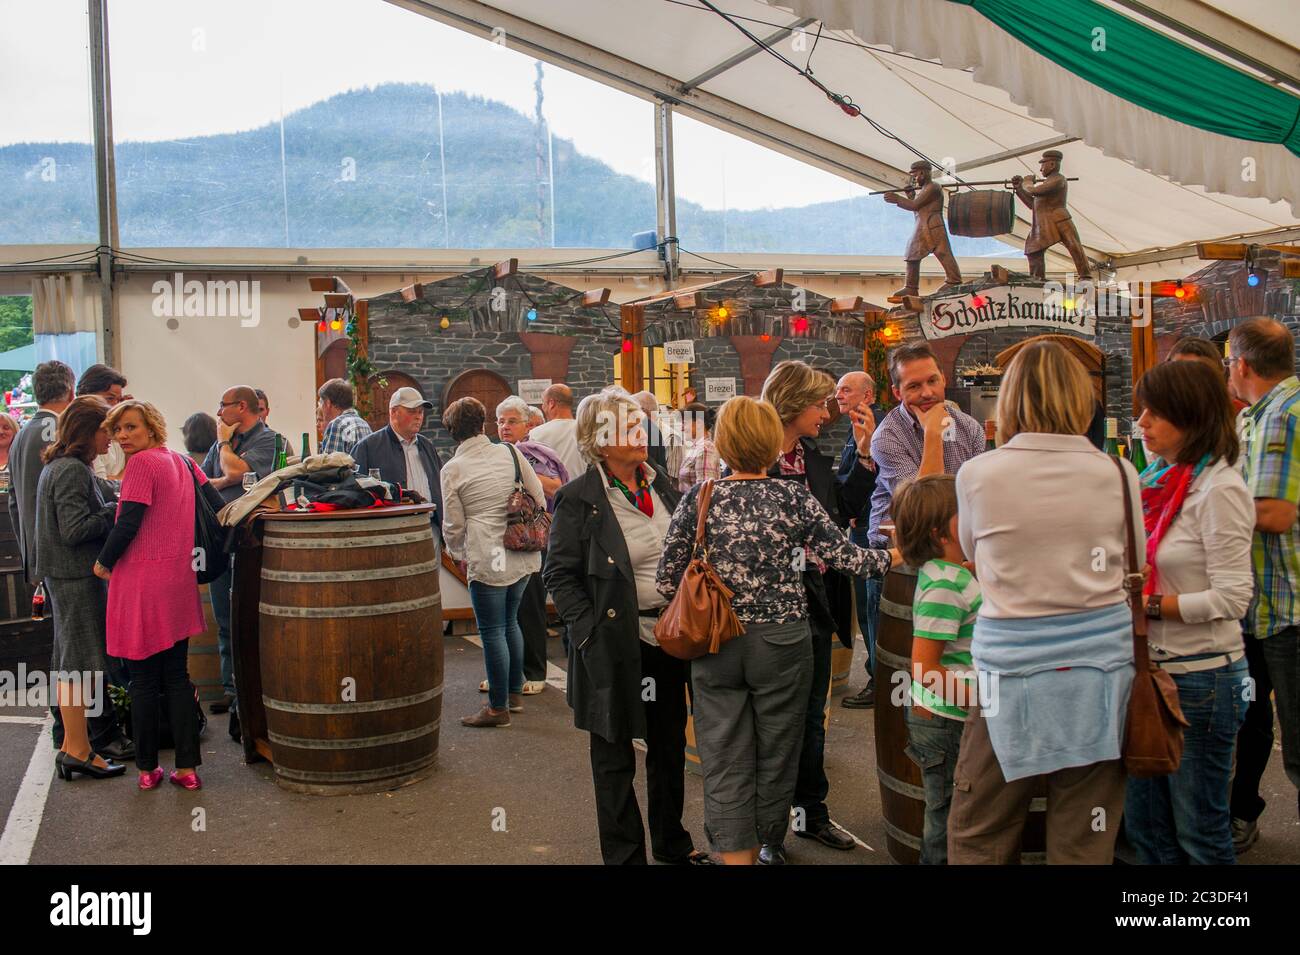 People celebrating a wine festival in a tent in the town of Traben-Trarbach on the Middle Moselle are a town in the Bernkastel-Wittlich district in Rh Stock Photo